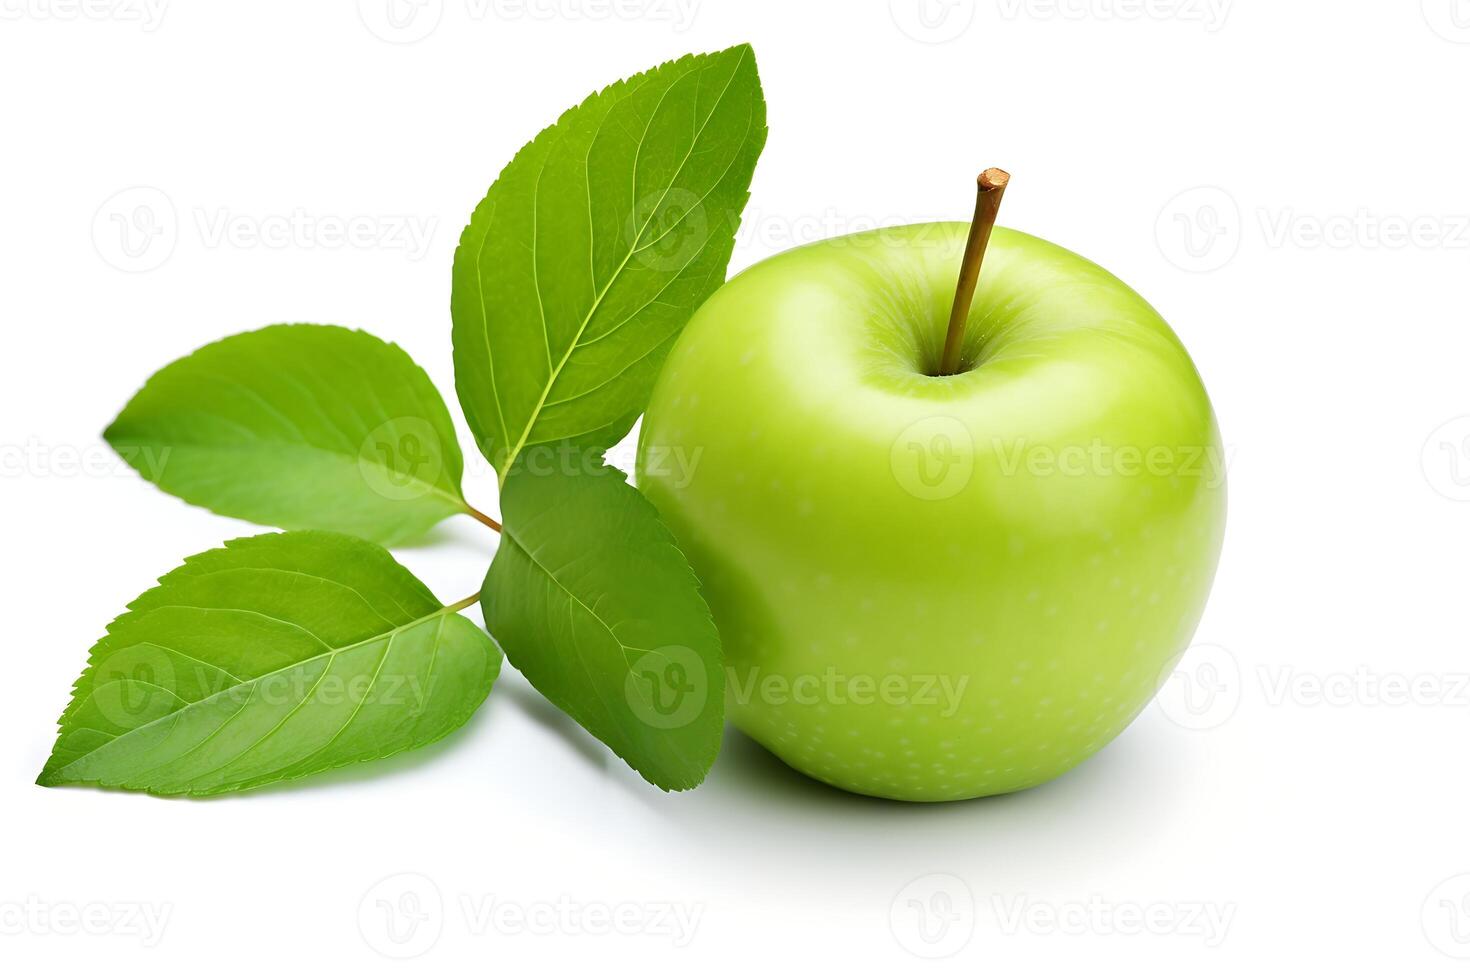 Green apples with leaves isolated on white background. File contains clipping path photo